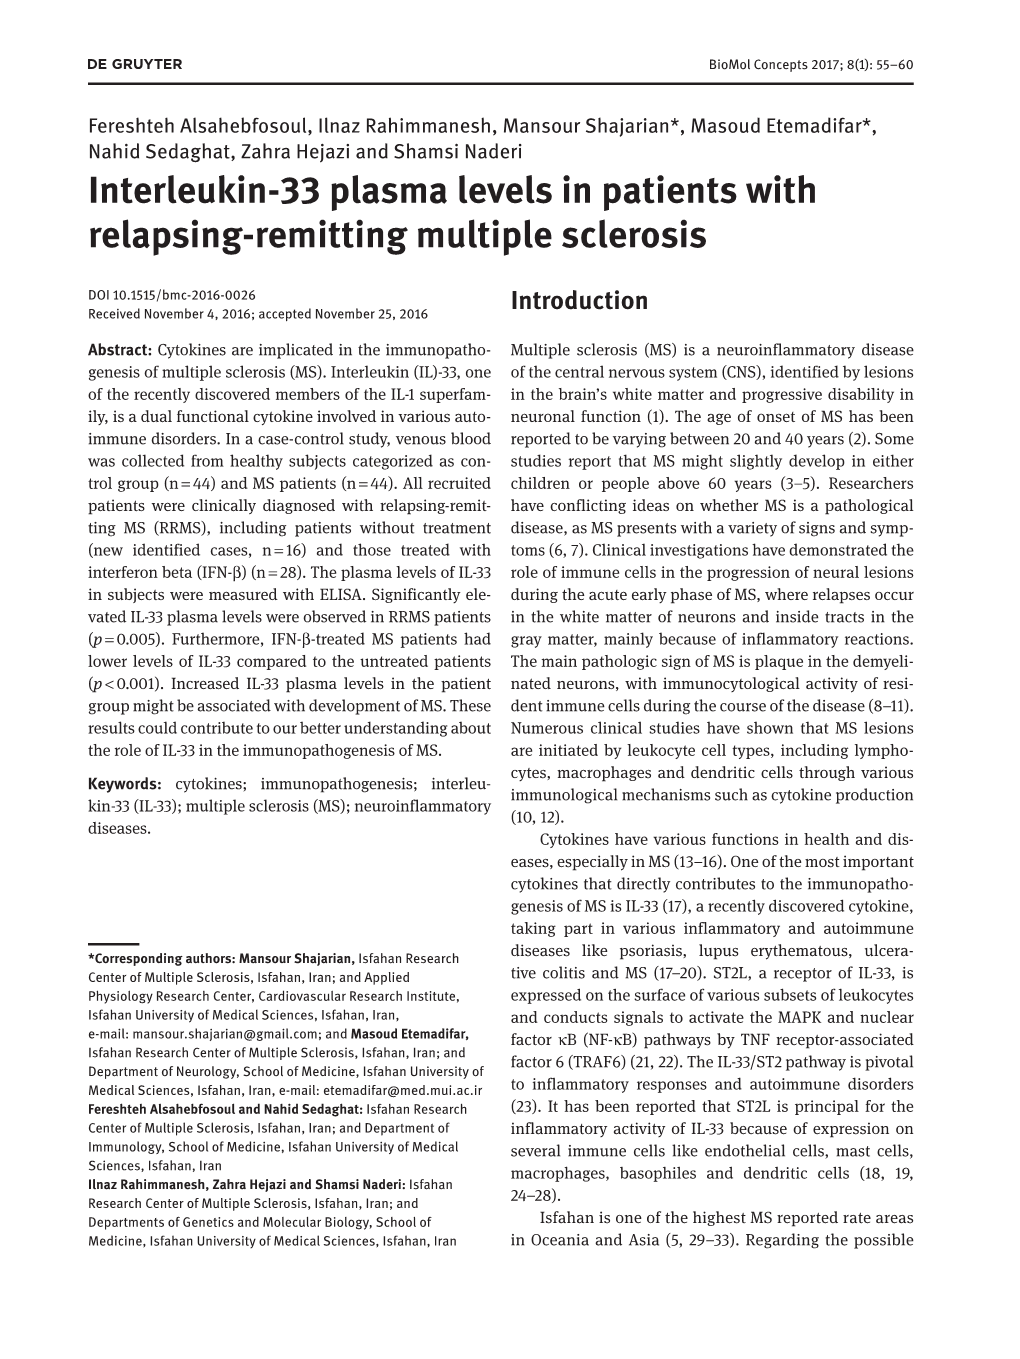 Interleukin-33 Plasma Levels in Patients with Relapsing-Remitting Multiple Sclerosis